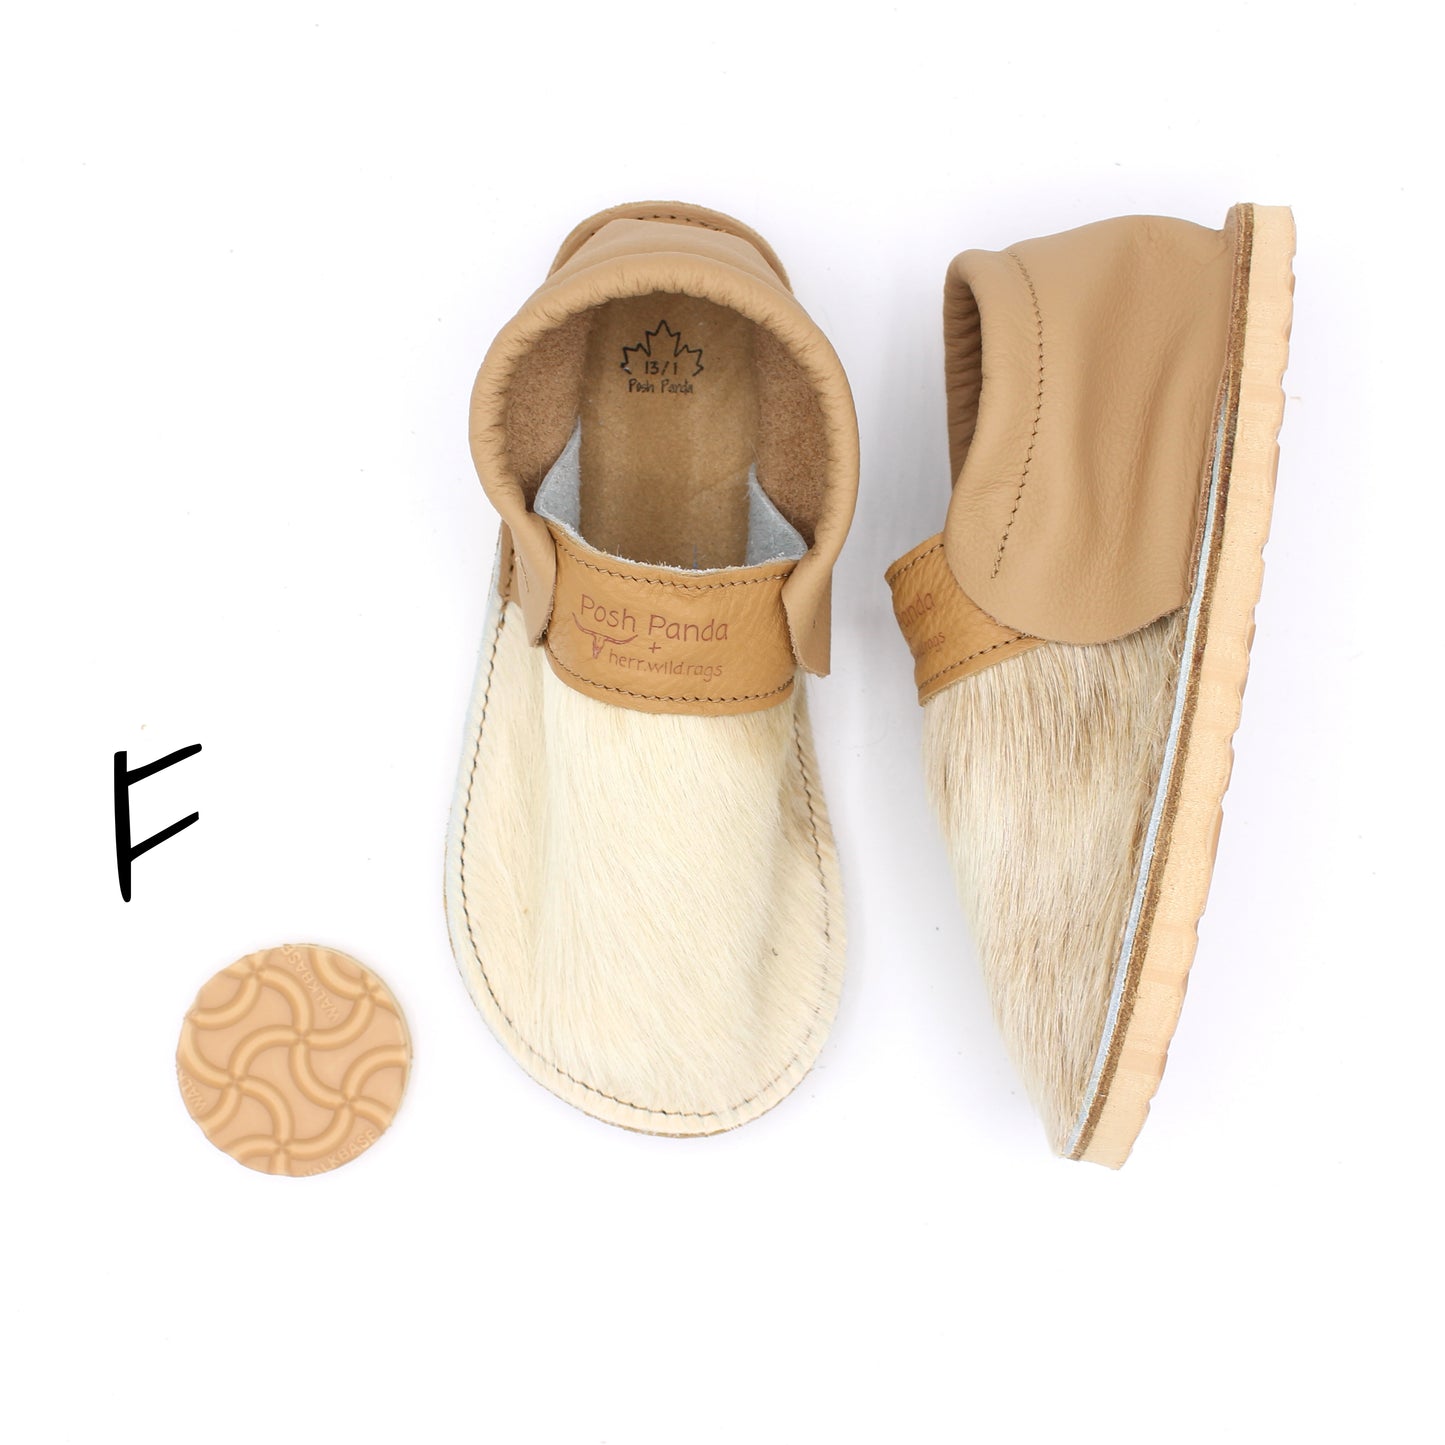 Hair Hide Mocs - YOUTH - Size 13/1 (RUGGED Sole)